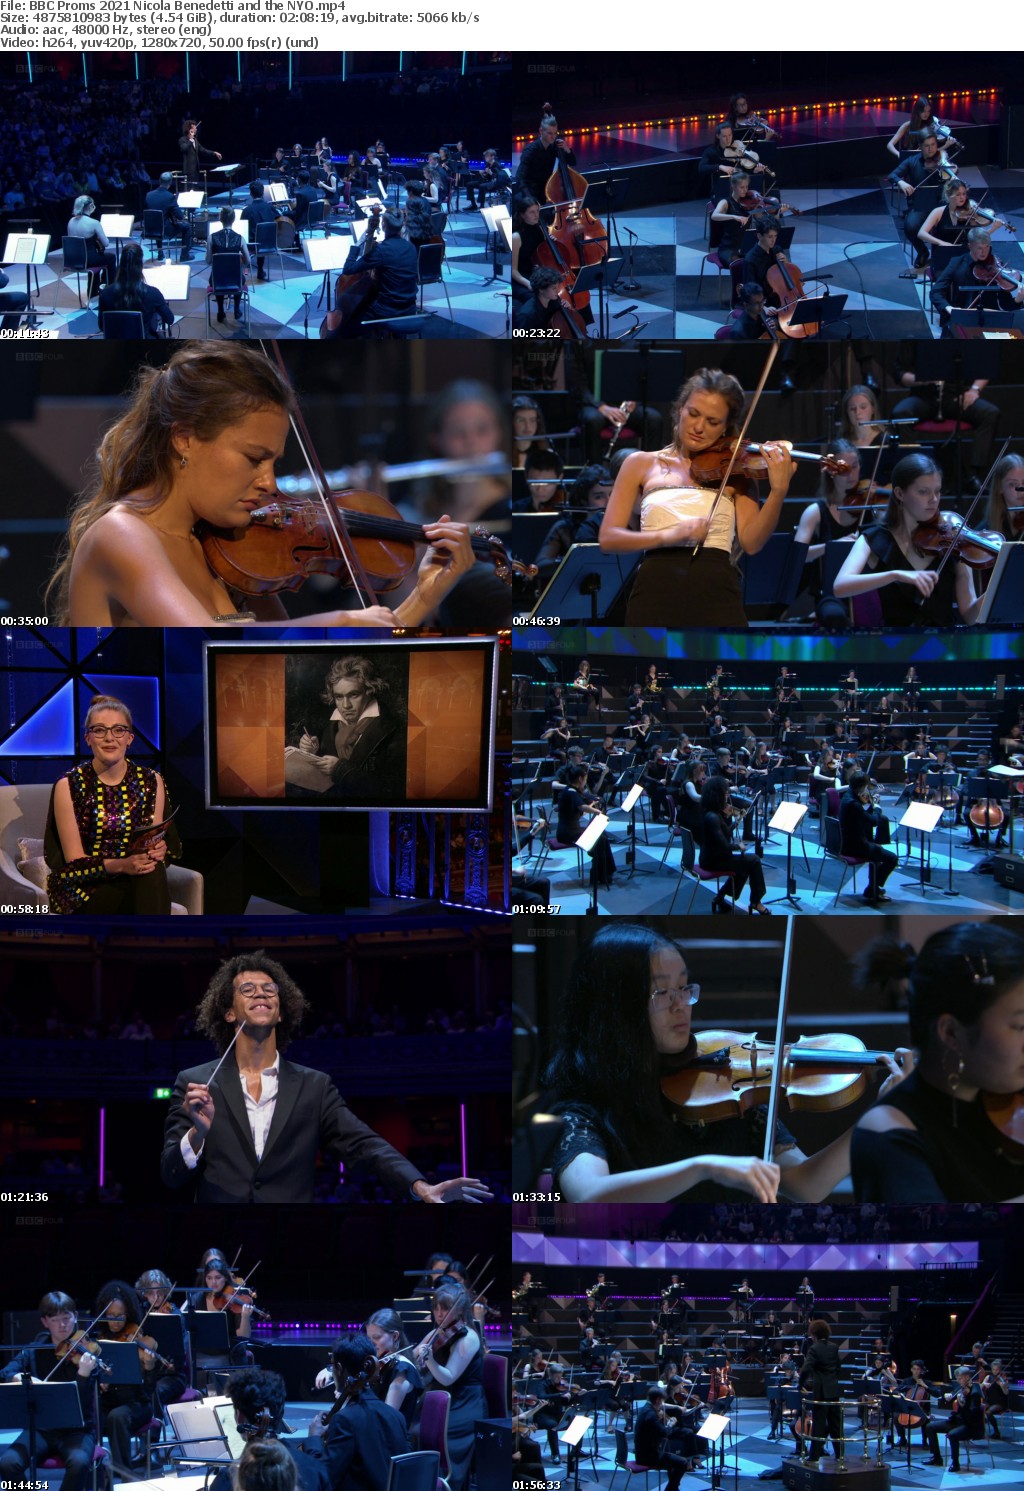 BBC Proms 2021 Nicola Benedetti and the NYO (1280x720p HD, 50fps, soft Eng subs)